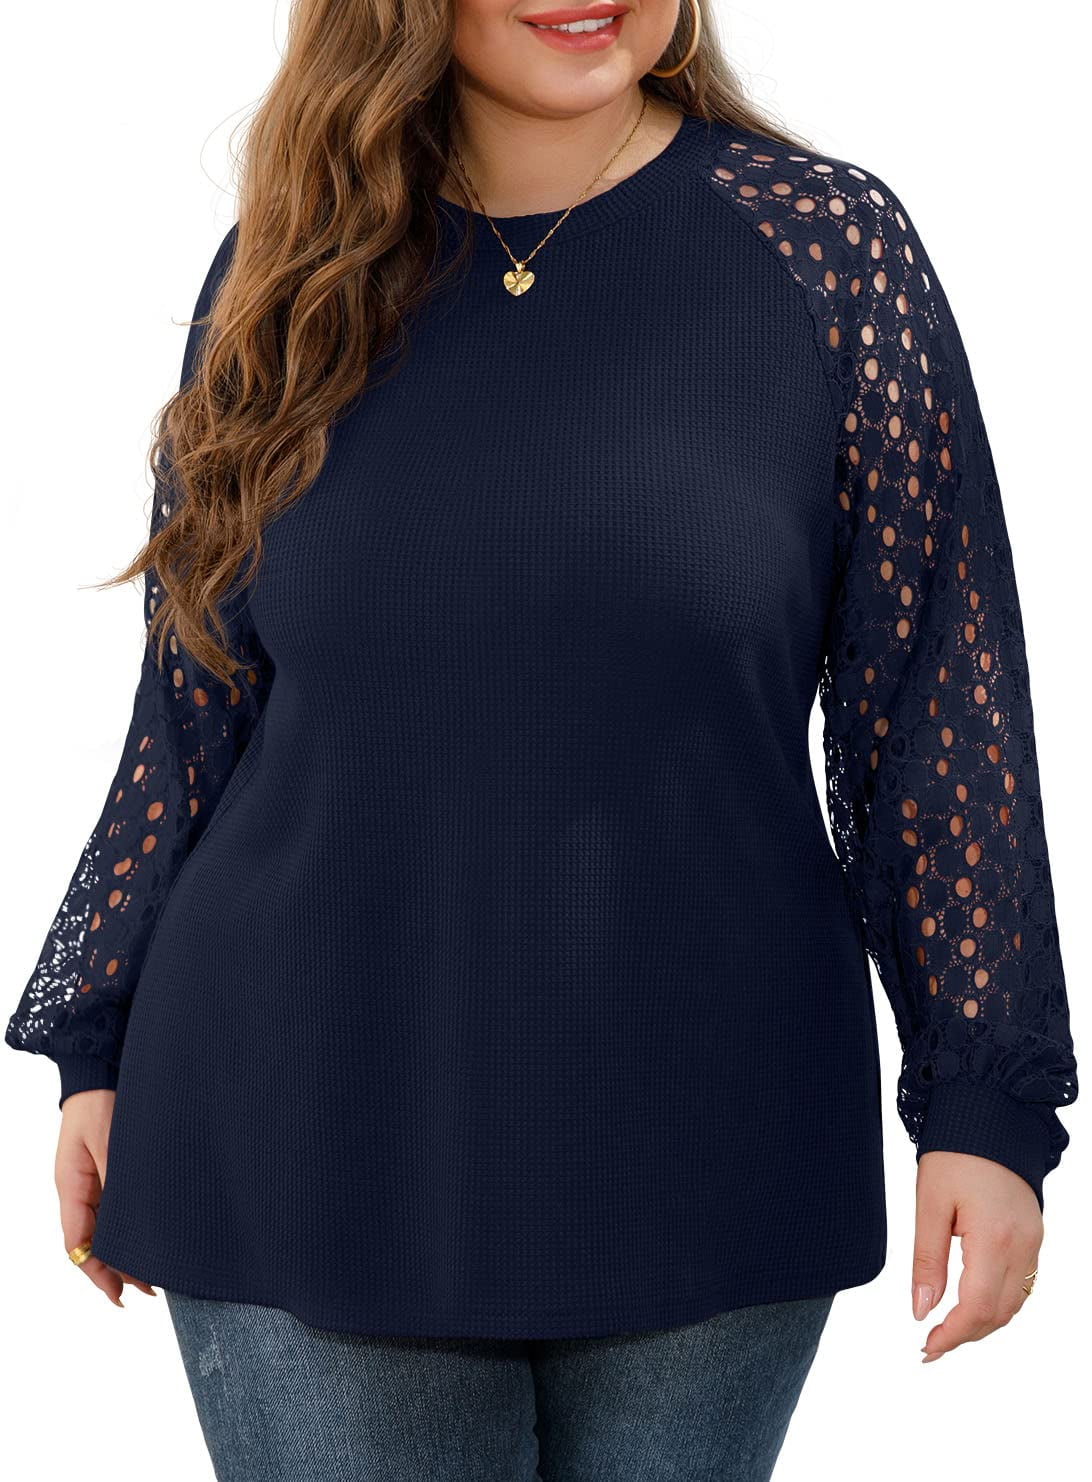  Plus Size Tops For Women Lace Sleeve Blouse Waffle Knit Long  Sleeve Shirts Royal Blue-2X